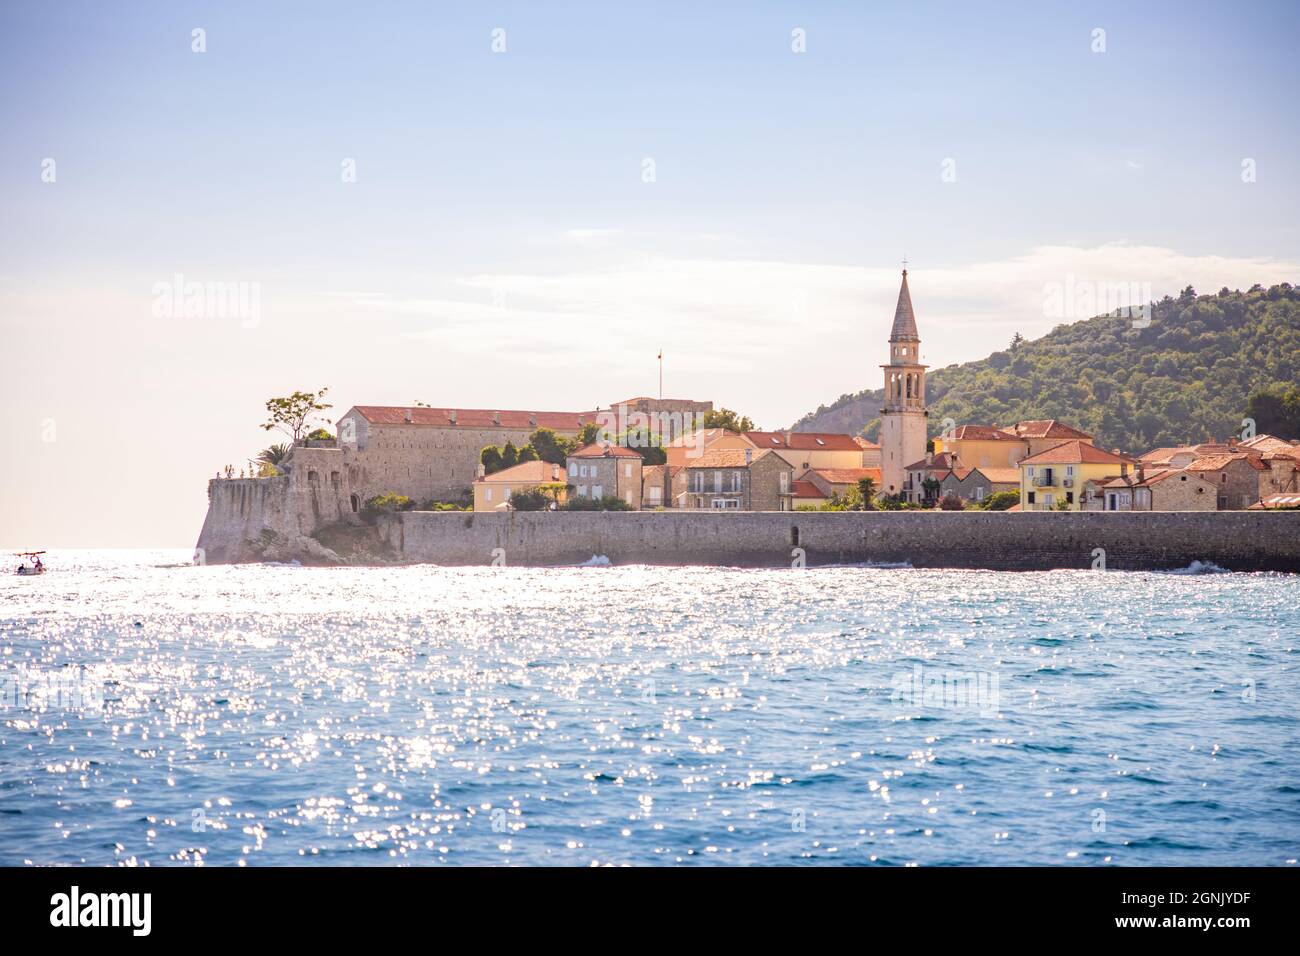 View from water of the old town of Budva city in Montenegro, view from island of St. Nicholas Stock Photo